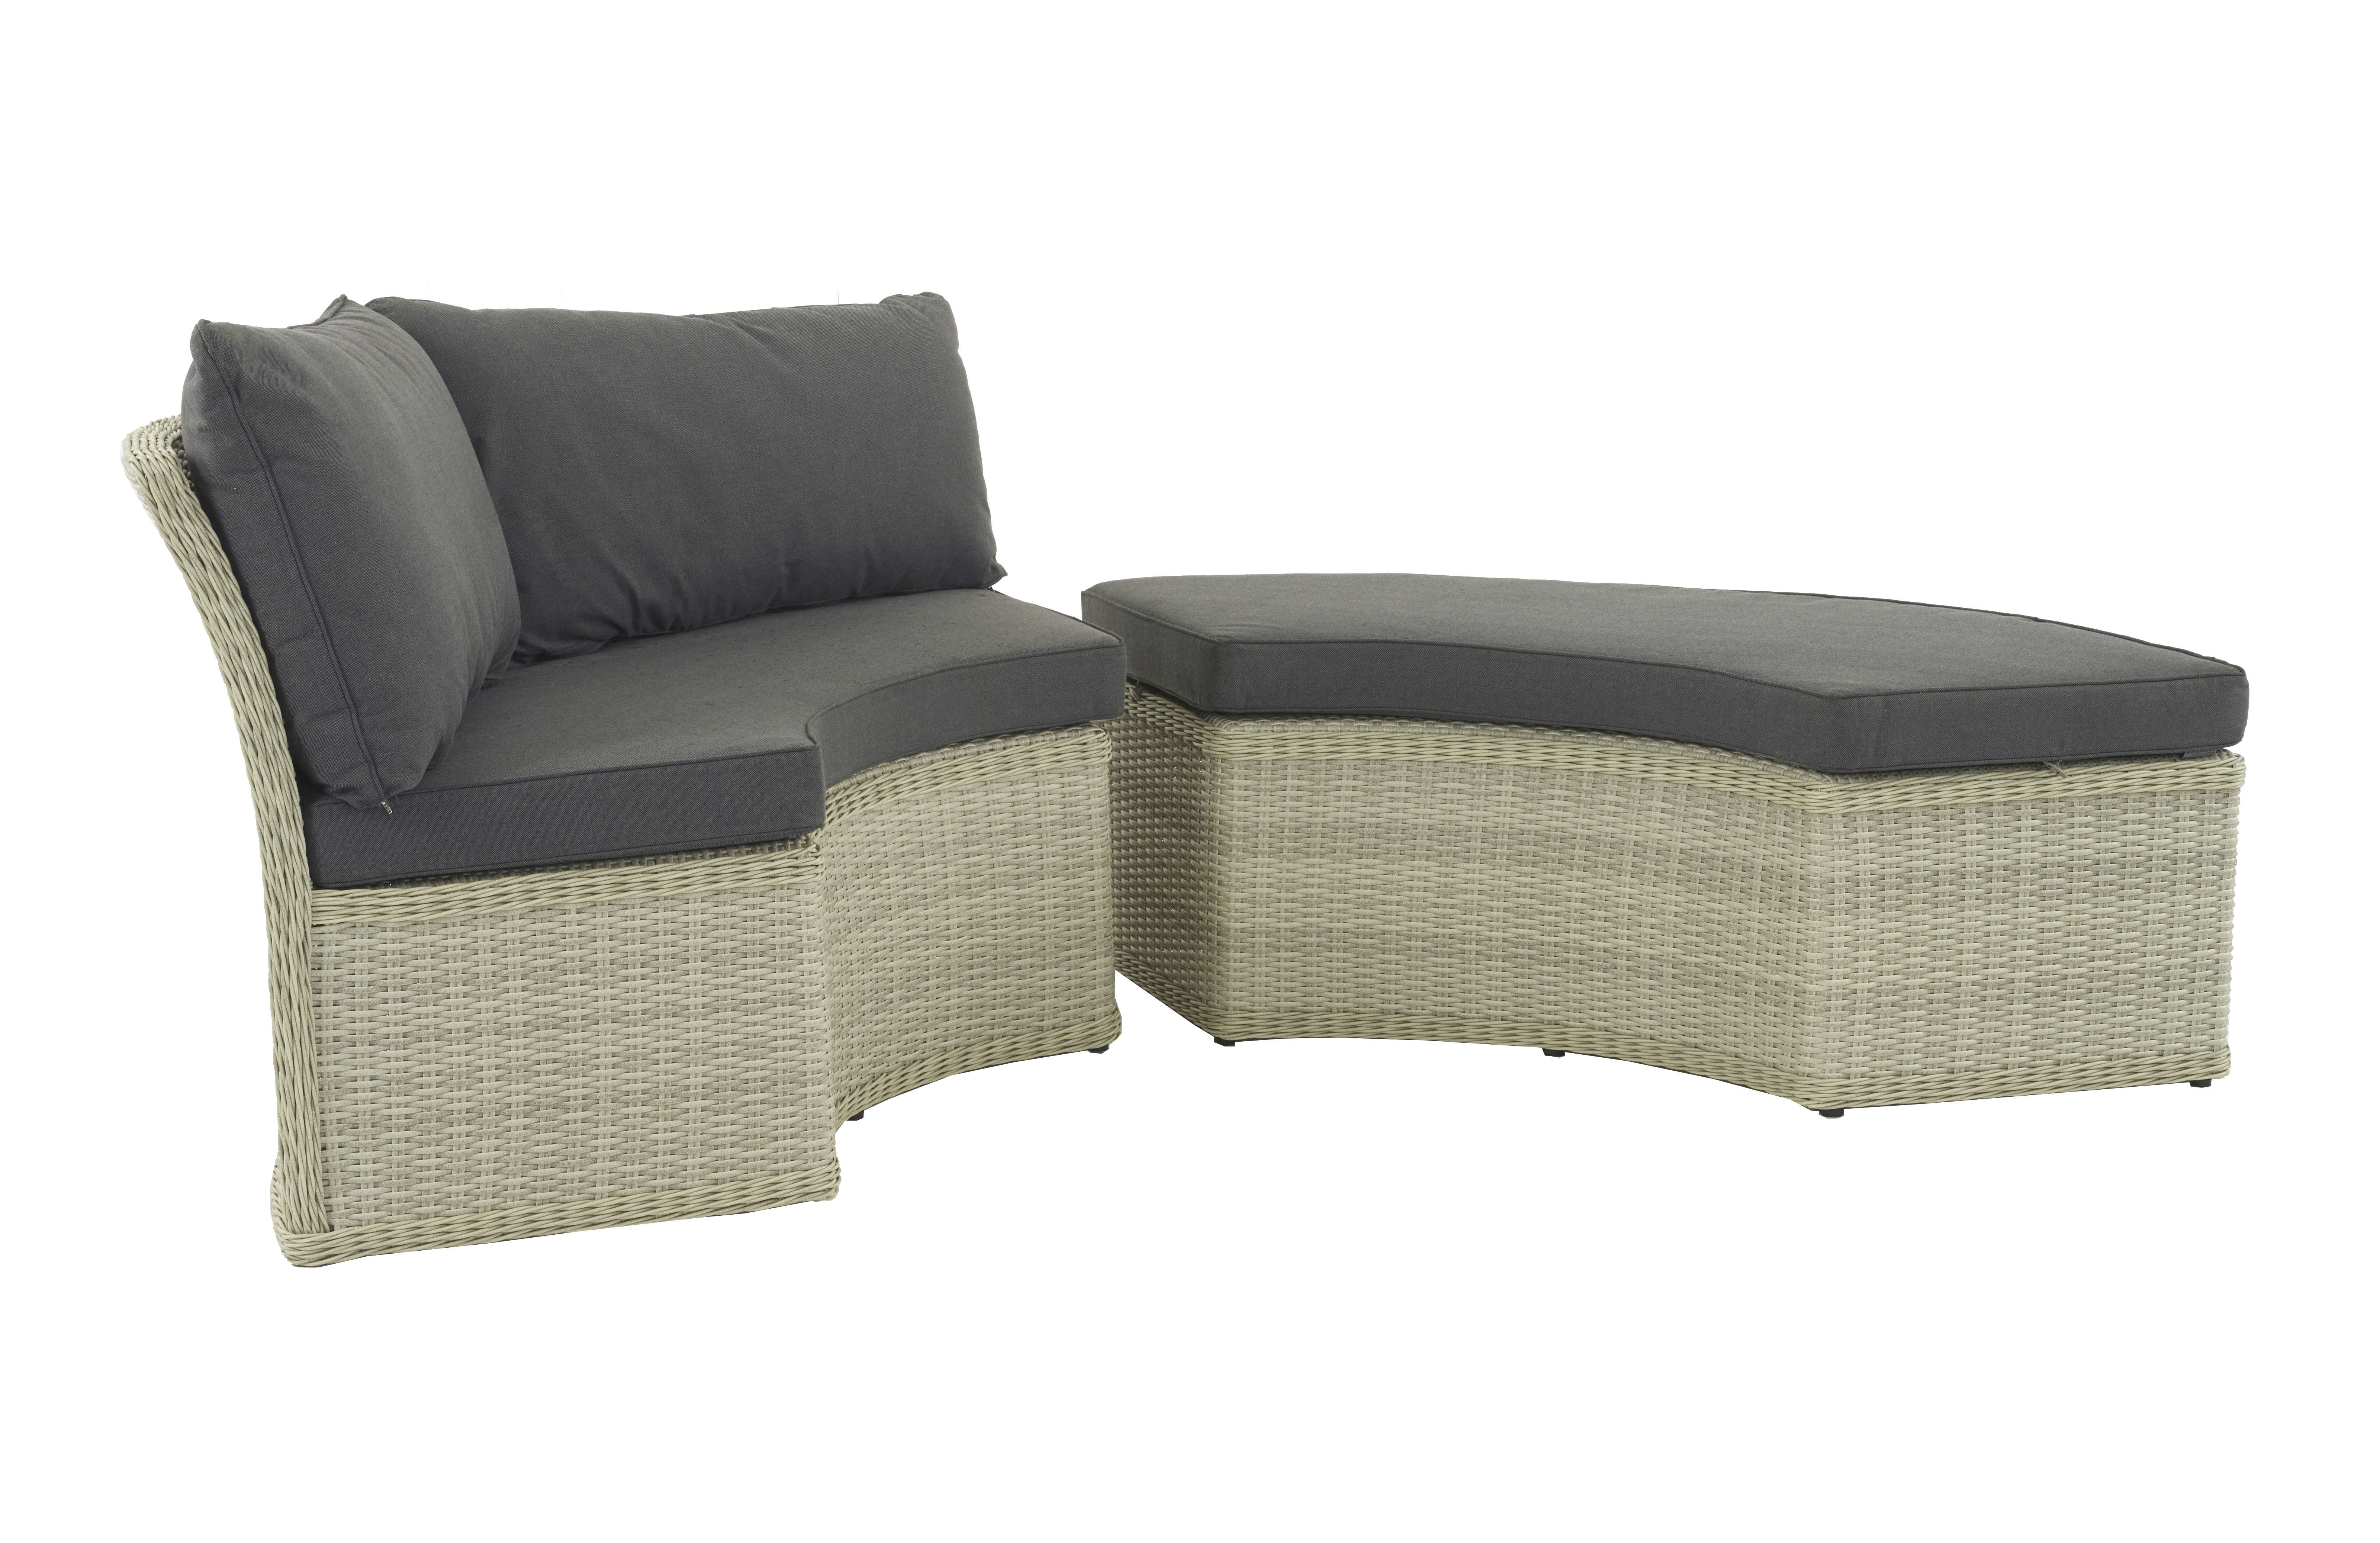 Set A502 Monterey Curved Sofa & Bench - Right (Dove Grey)